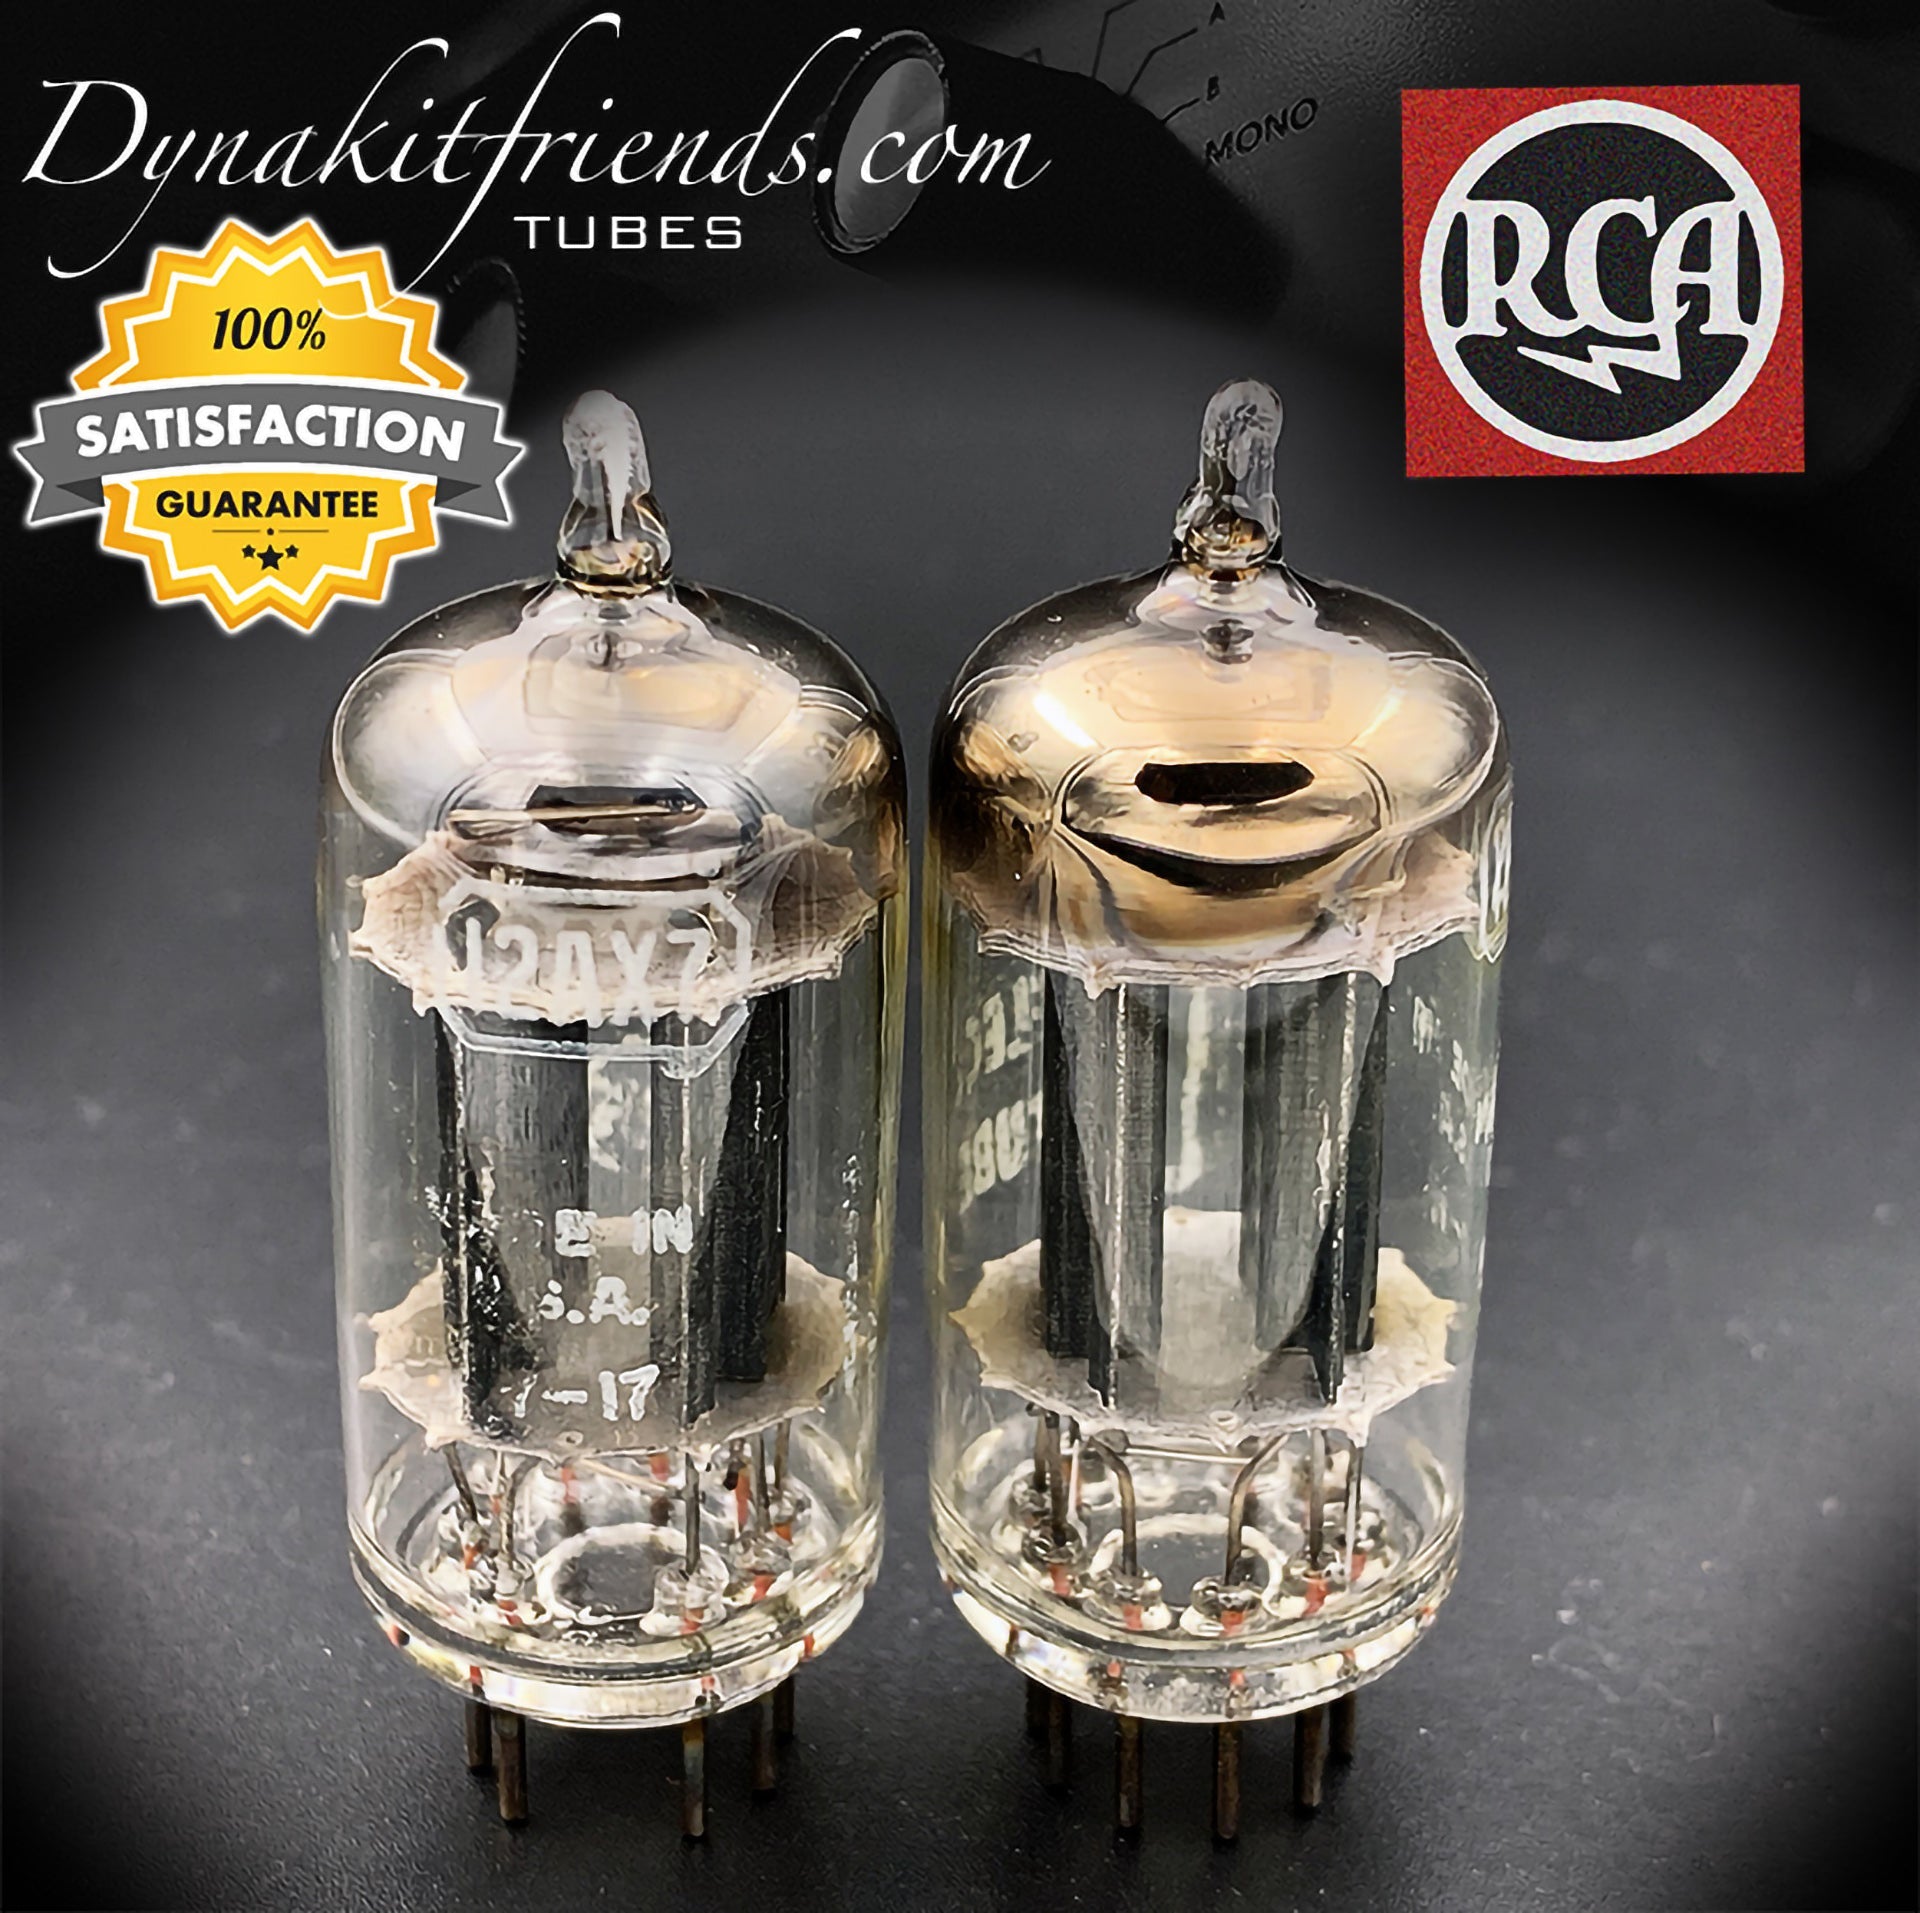 12AX7 ( ECC83 ) RCA Long Black Plates [] Tilted Getter Matched Tubes MADE IN USA '57 - Vacuum Tubes Treasures